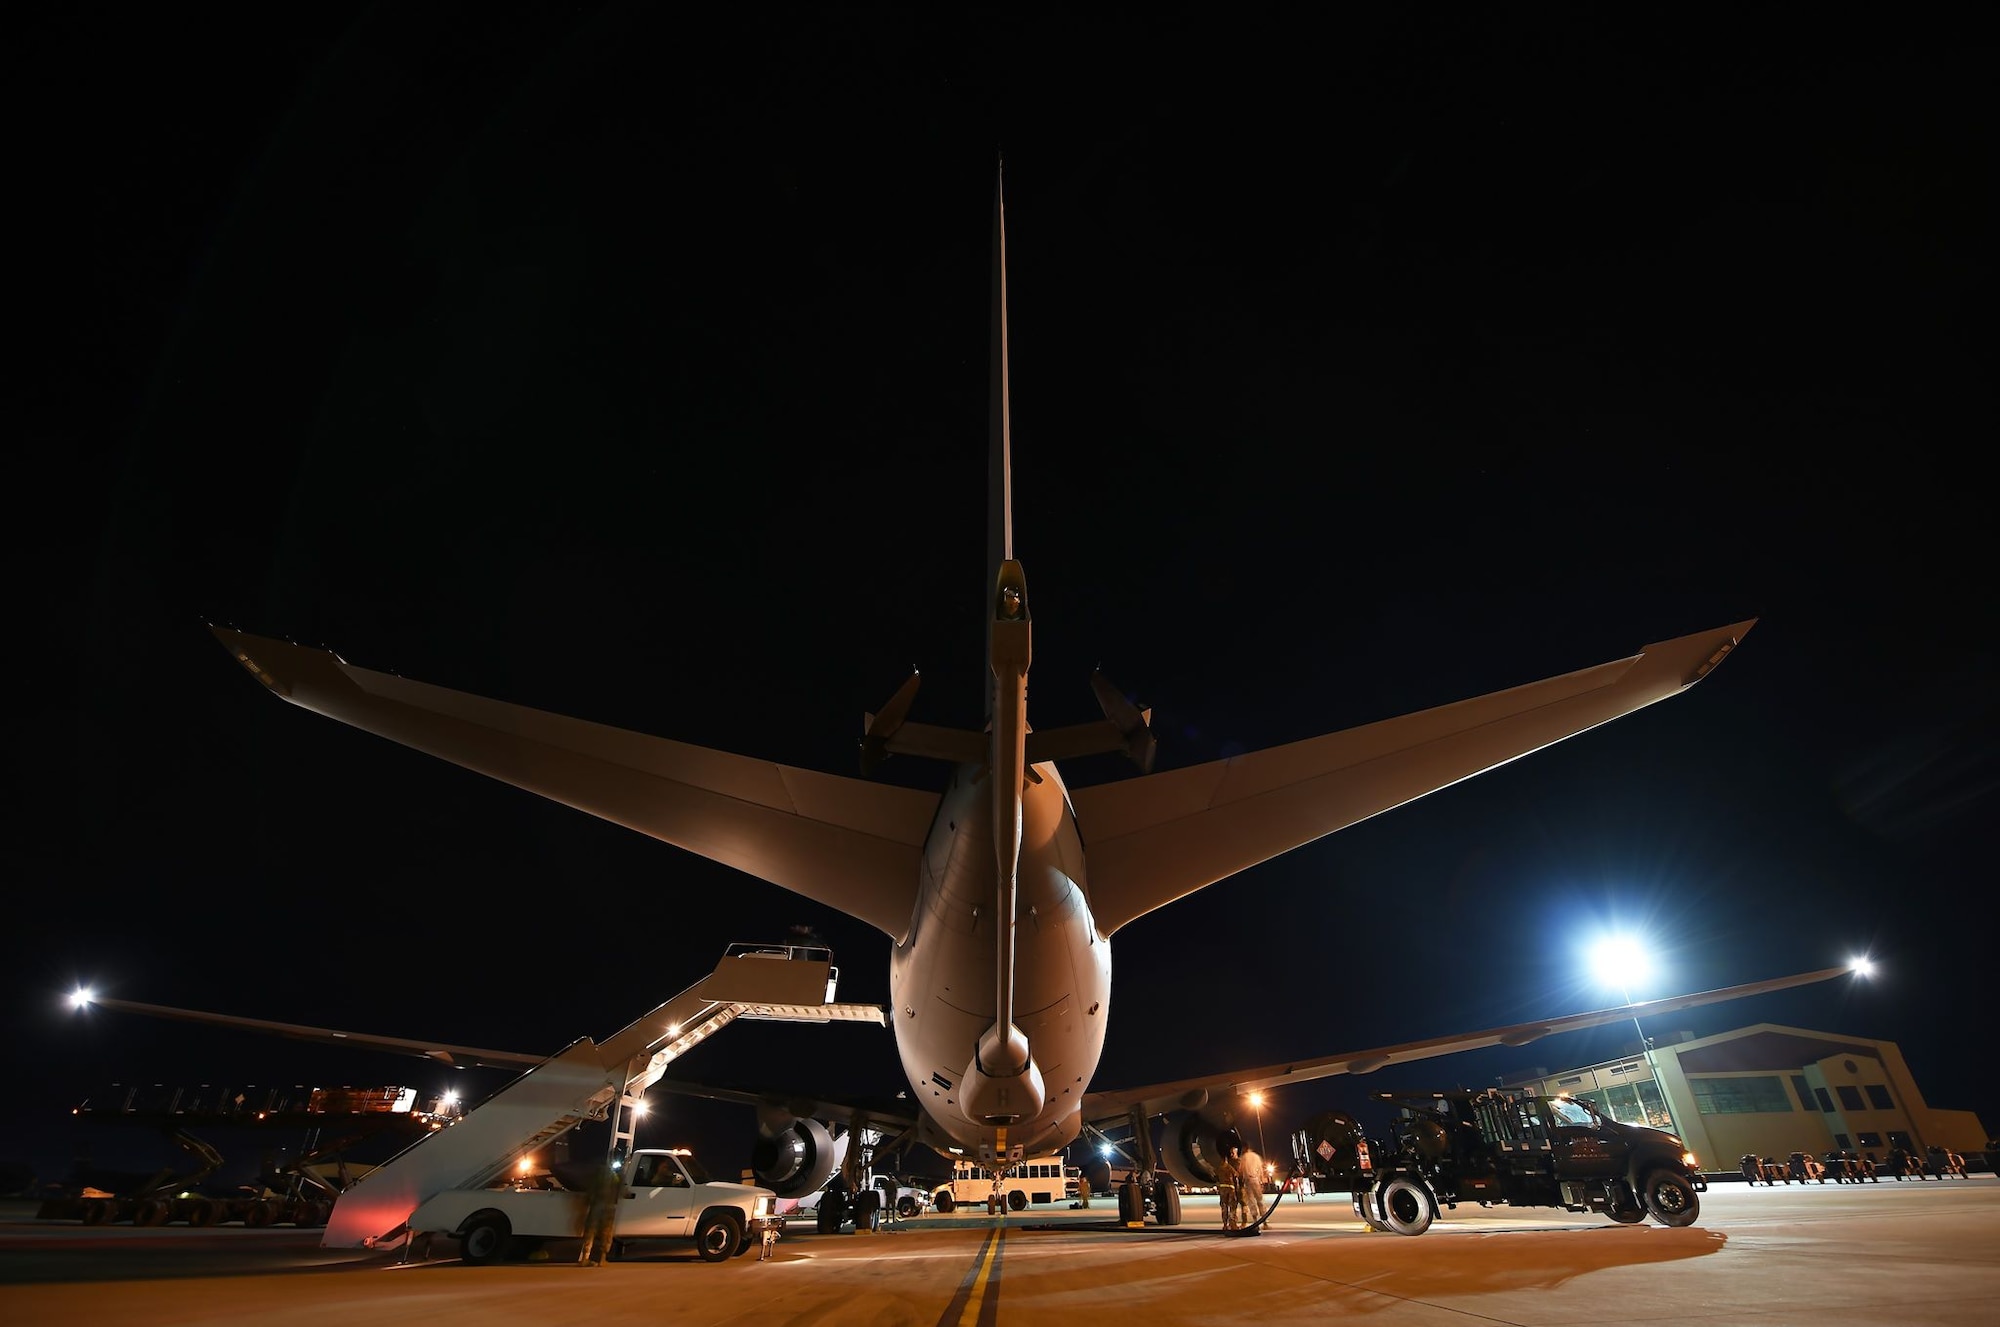 U.S. Airmen from McConnell Air Force Base, Kansas, and Travis AFB, California, engage in post-flight and cargo-loading protocol, respectively, Aug. 21, 2019, at Travis AFB. The cargo load was the first time Airmen from Travis' 60th Aerial Port Squadronworked with the new KC-46 PEgasus aircraft. (U.S. Air Force photo by Senior Airman Christian Conrad)